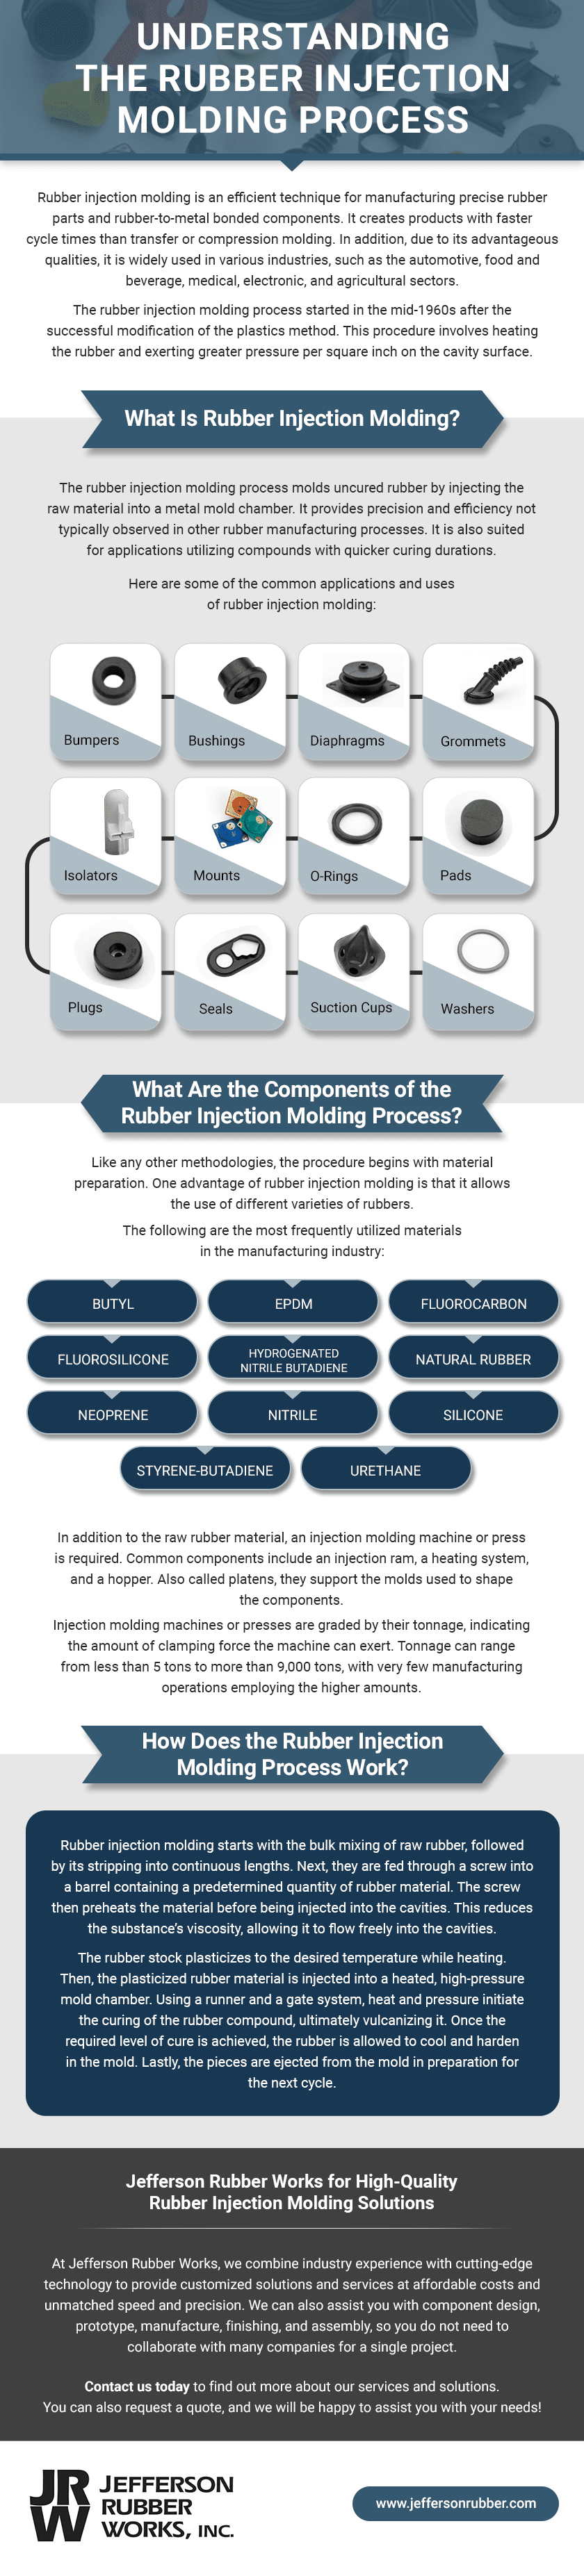 Understanding the Rubber Injection Molding Process